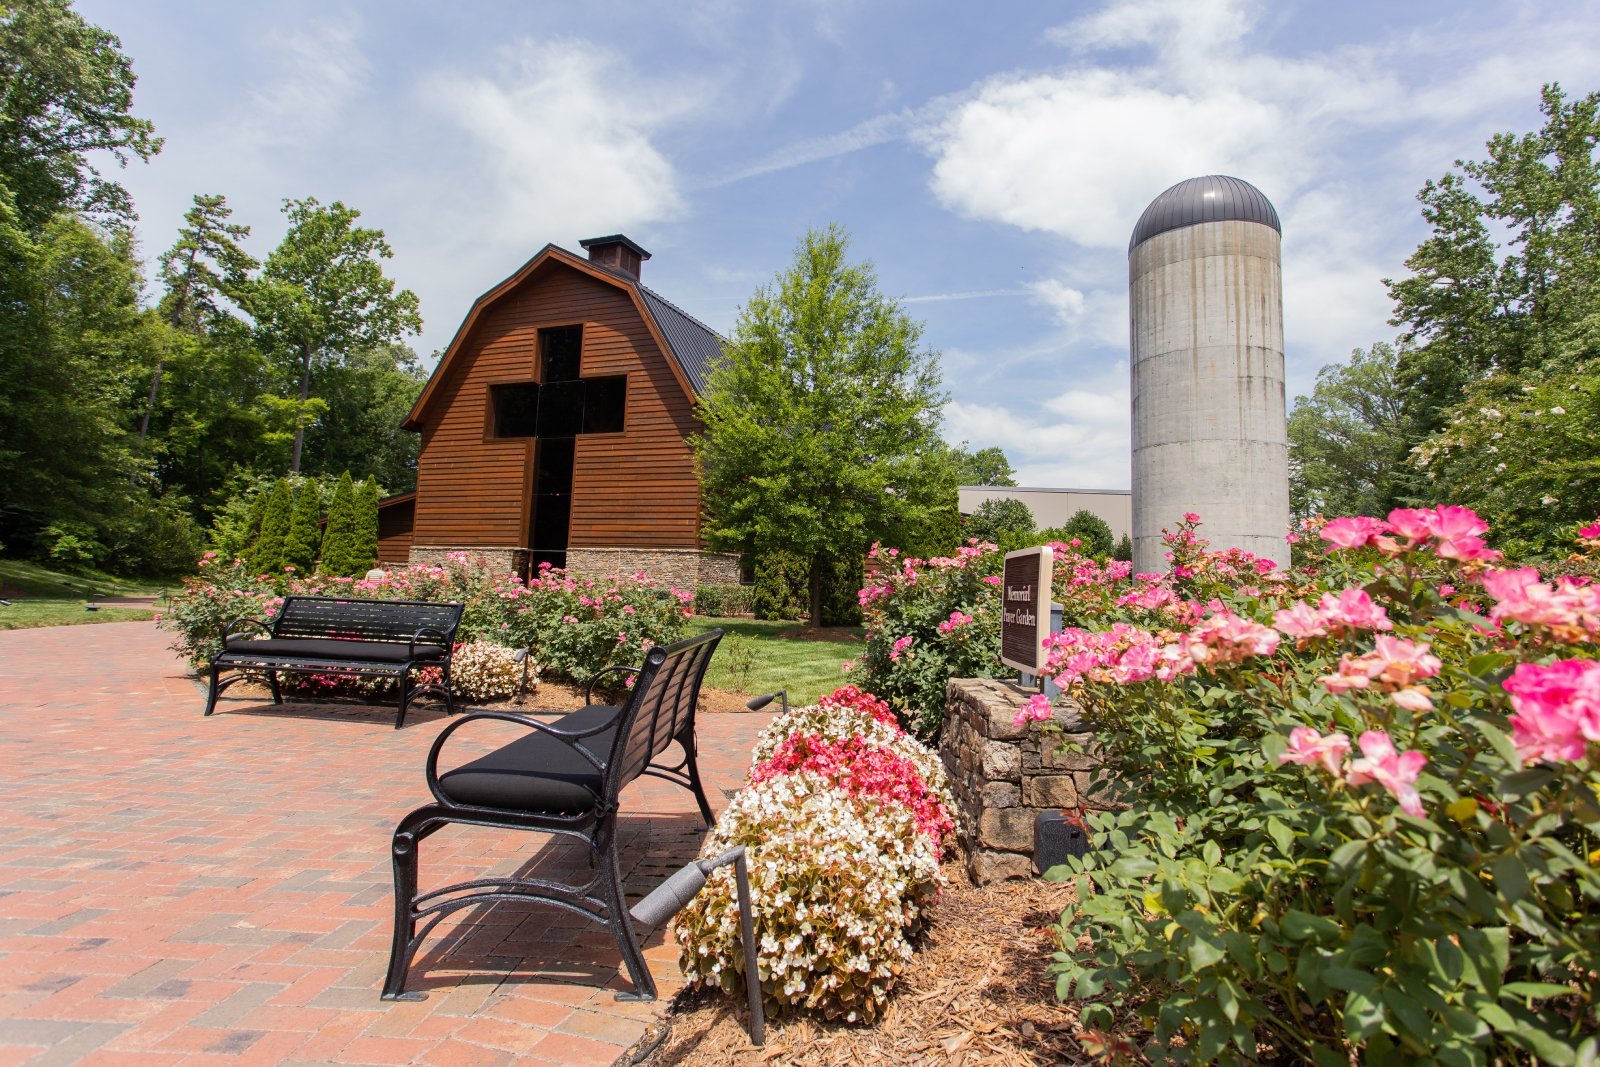 <p><span>Dedic</span></p> Image Credit: Shutterstock / ZikG <p><span>ated to the renowned evangelist, this library in Charlotte isn’t just a repository of books but a journey through the life of a man who inspired millions with his faith and integrity.</span></p>